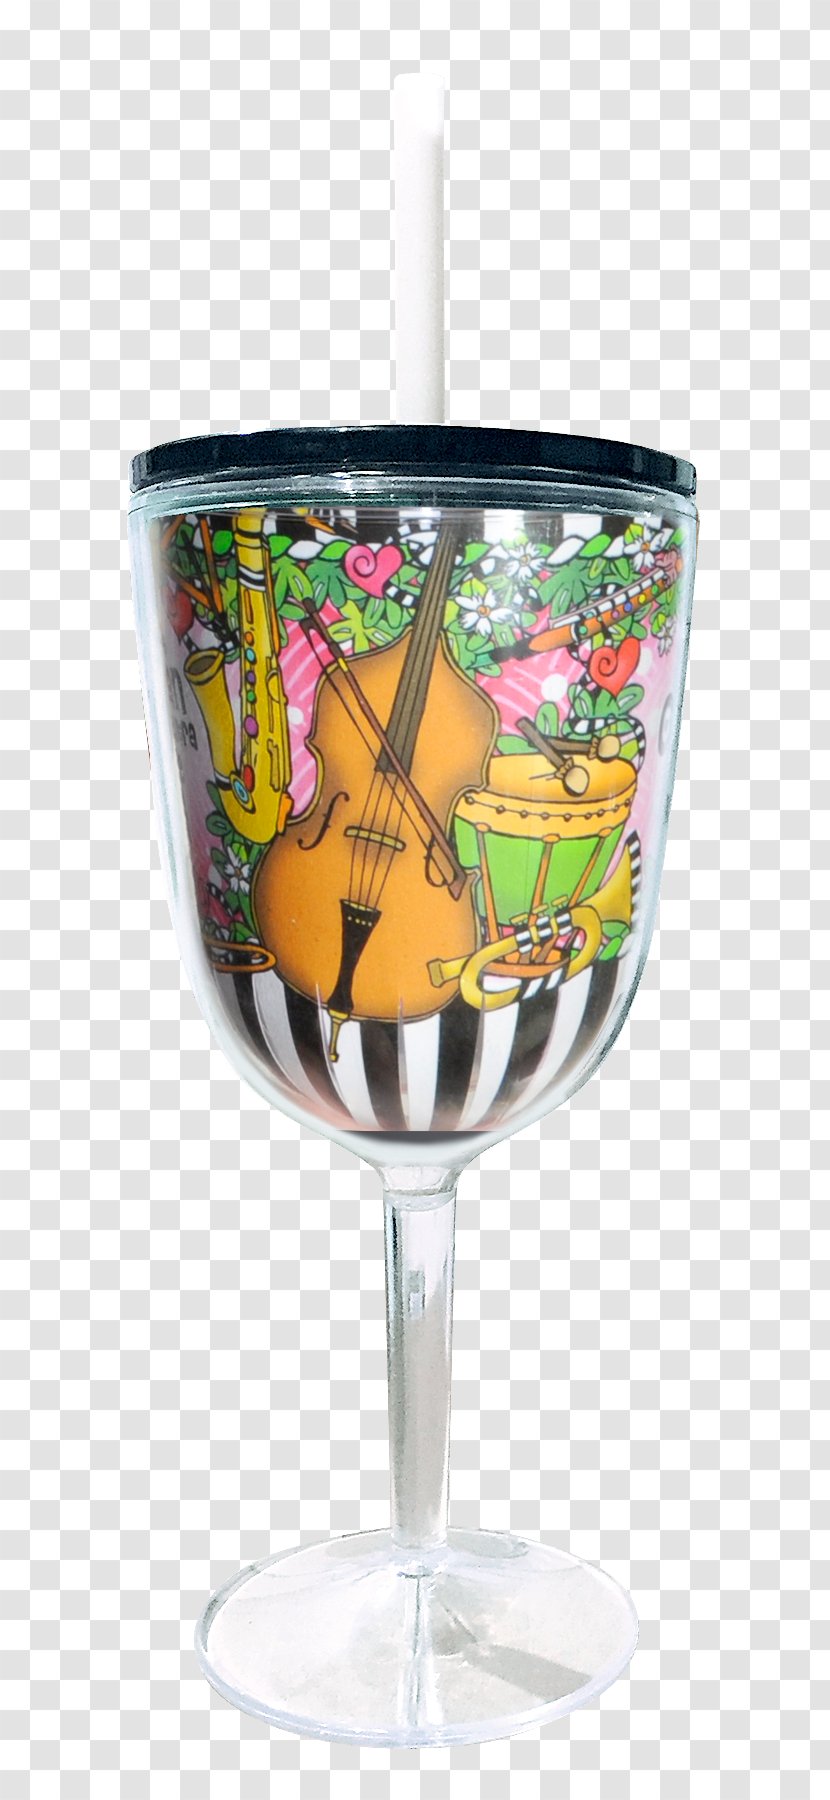 Wine Glass Champagne Cocktail Drink - Stemware Transparent PNG